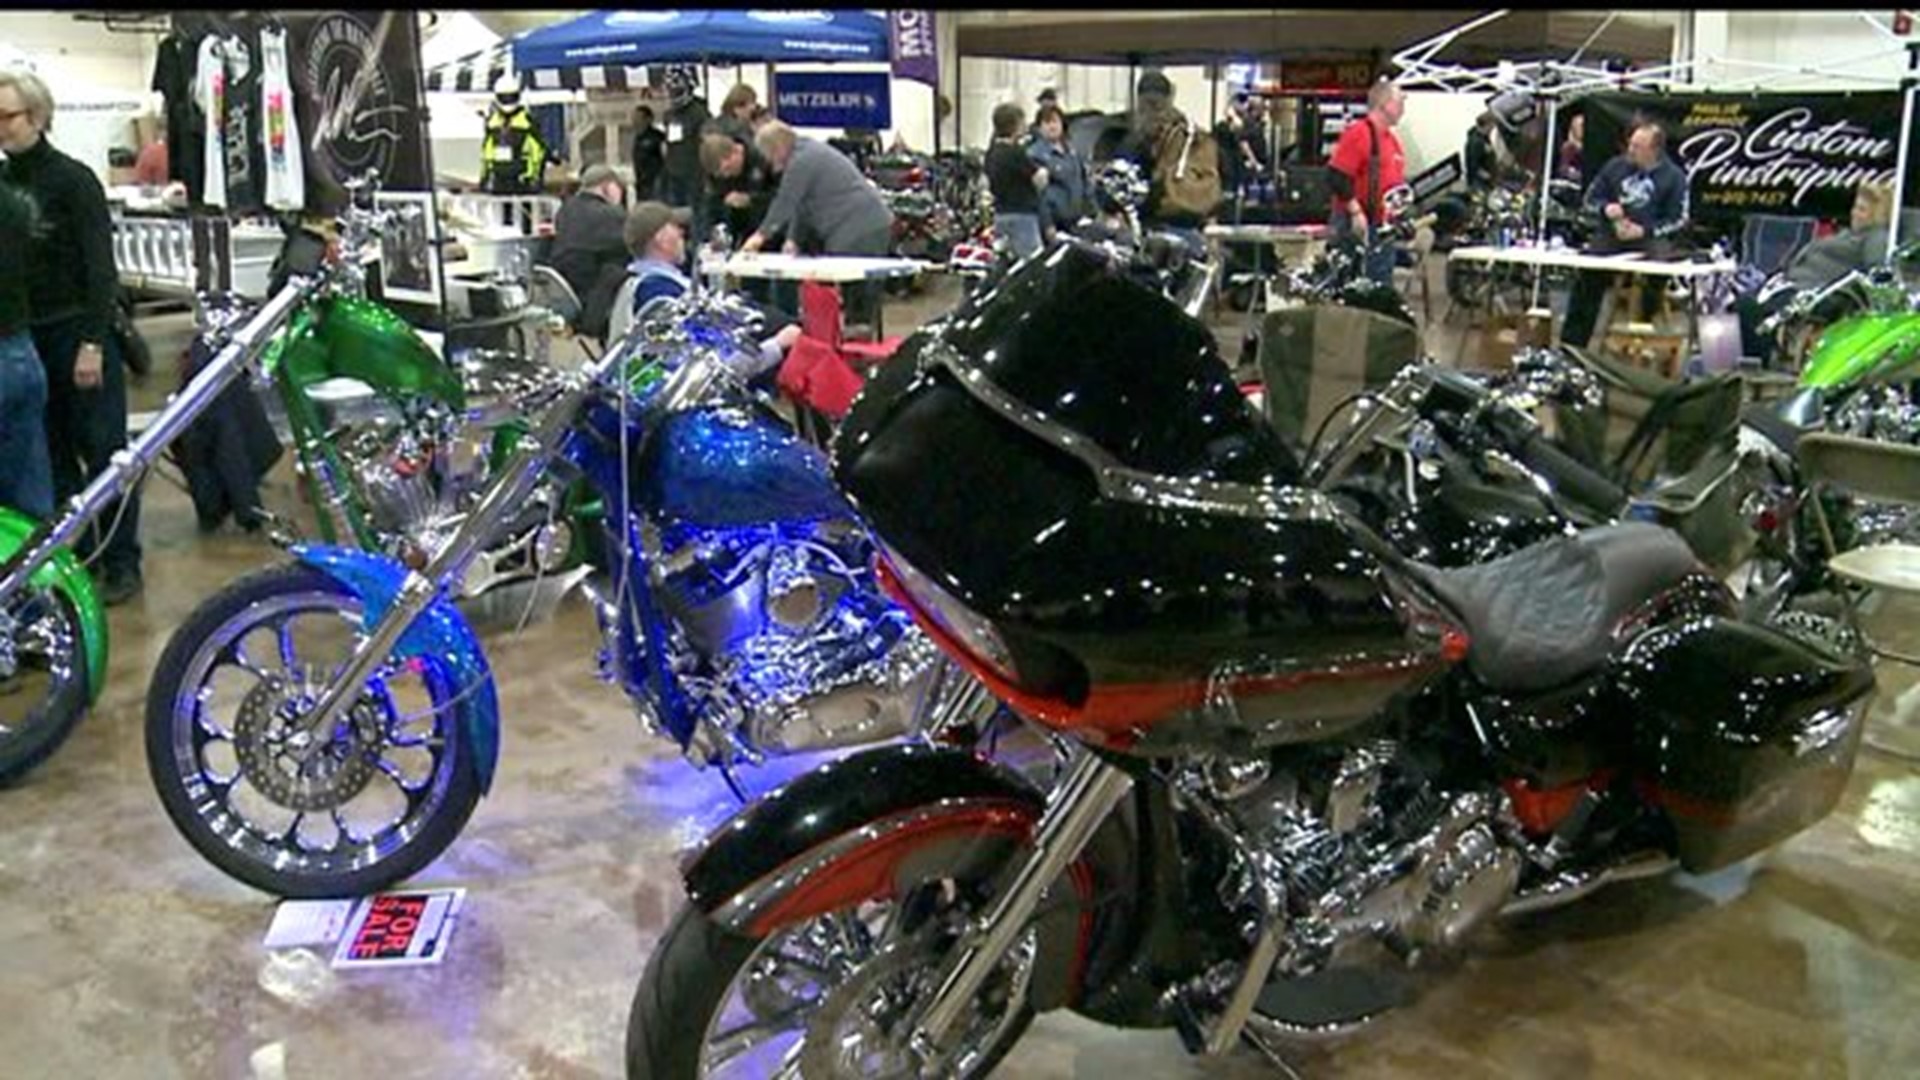 Full Throttle Bike Show brings in hundreds of motorcyclists to York Co.